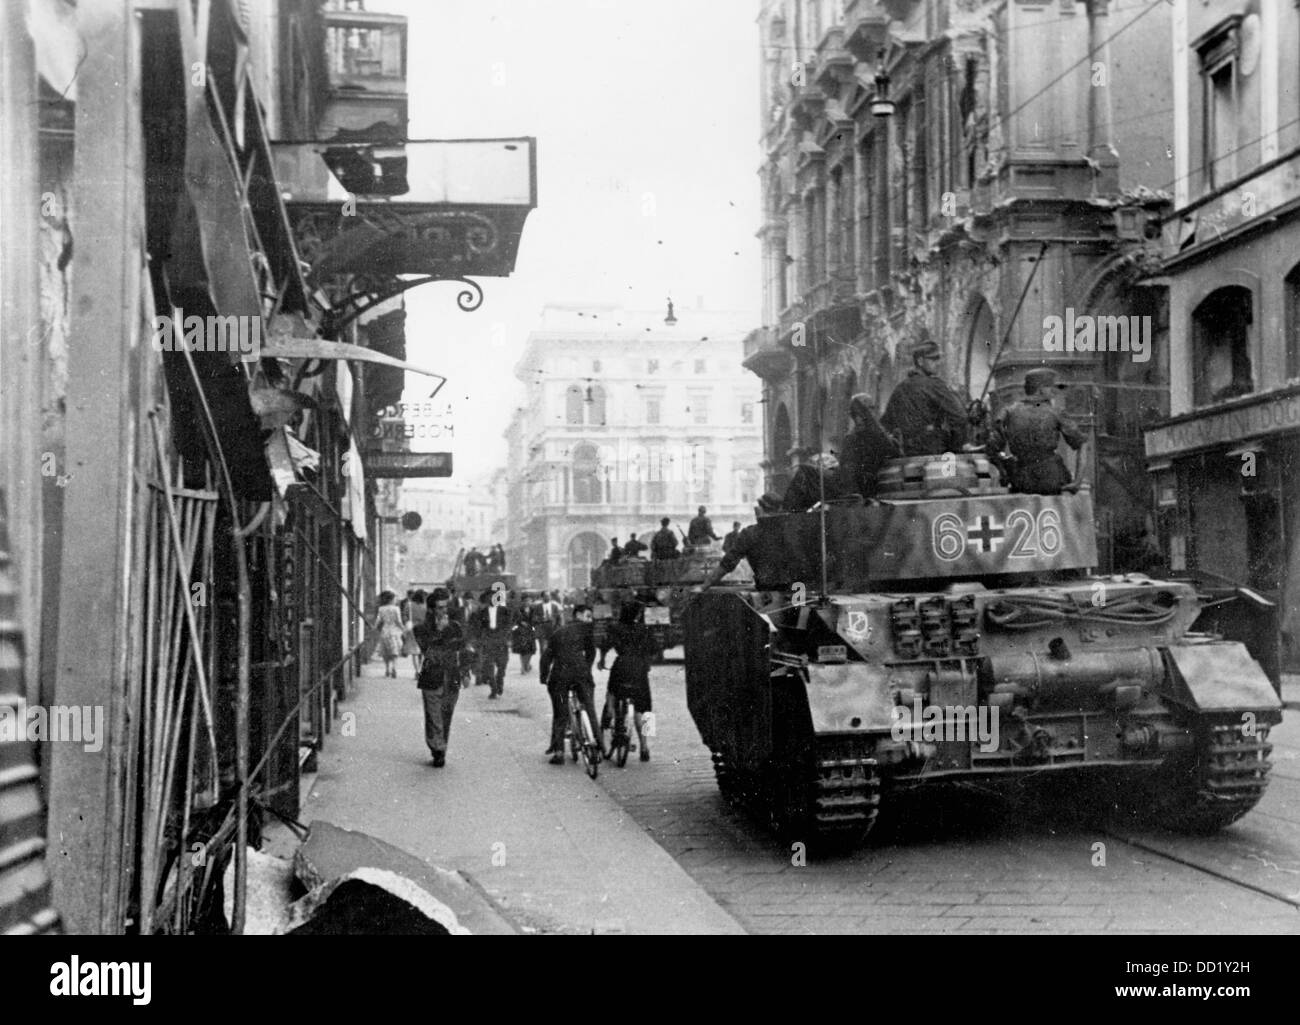 The image from the Nazi Propaganda! shows a tank of the SS Leibstandarte 'Adolf Hitler during the occupation of Milano, Italy, in the fight against the Badoglio government in Italy on 11 September 1943. Fotoarchiv für Zeitgeschichte Stock Photo